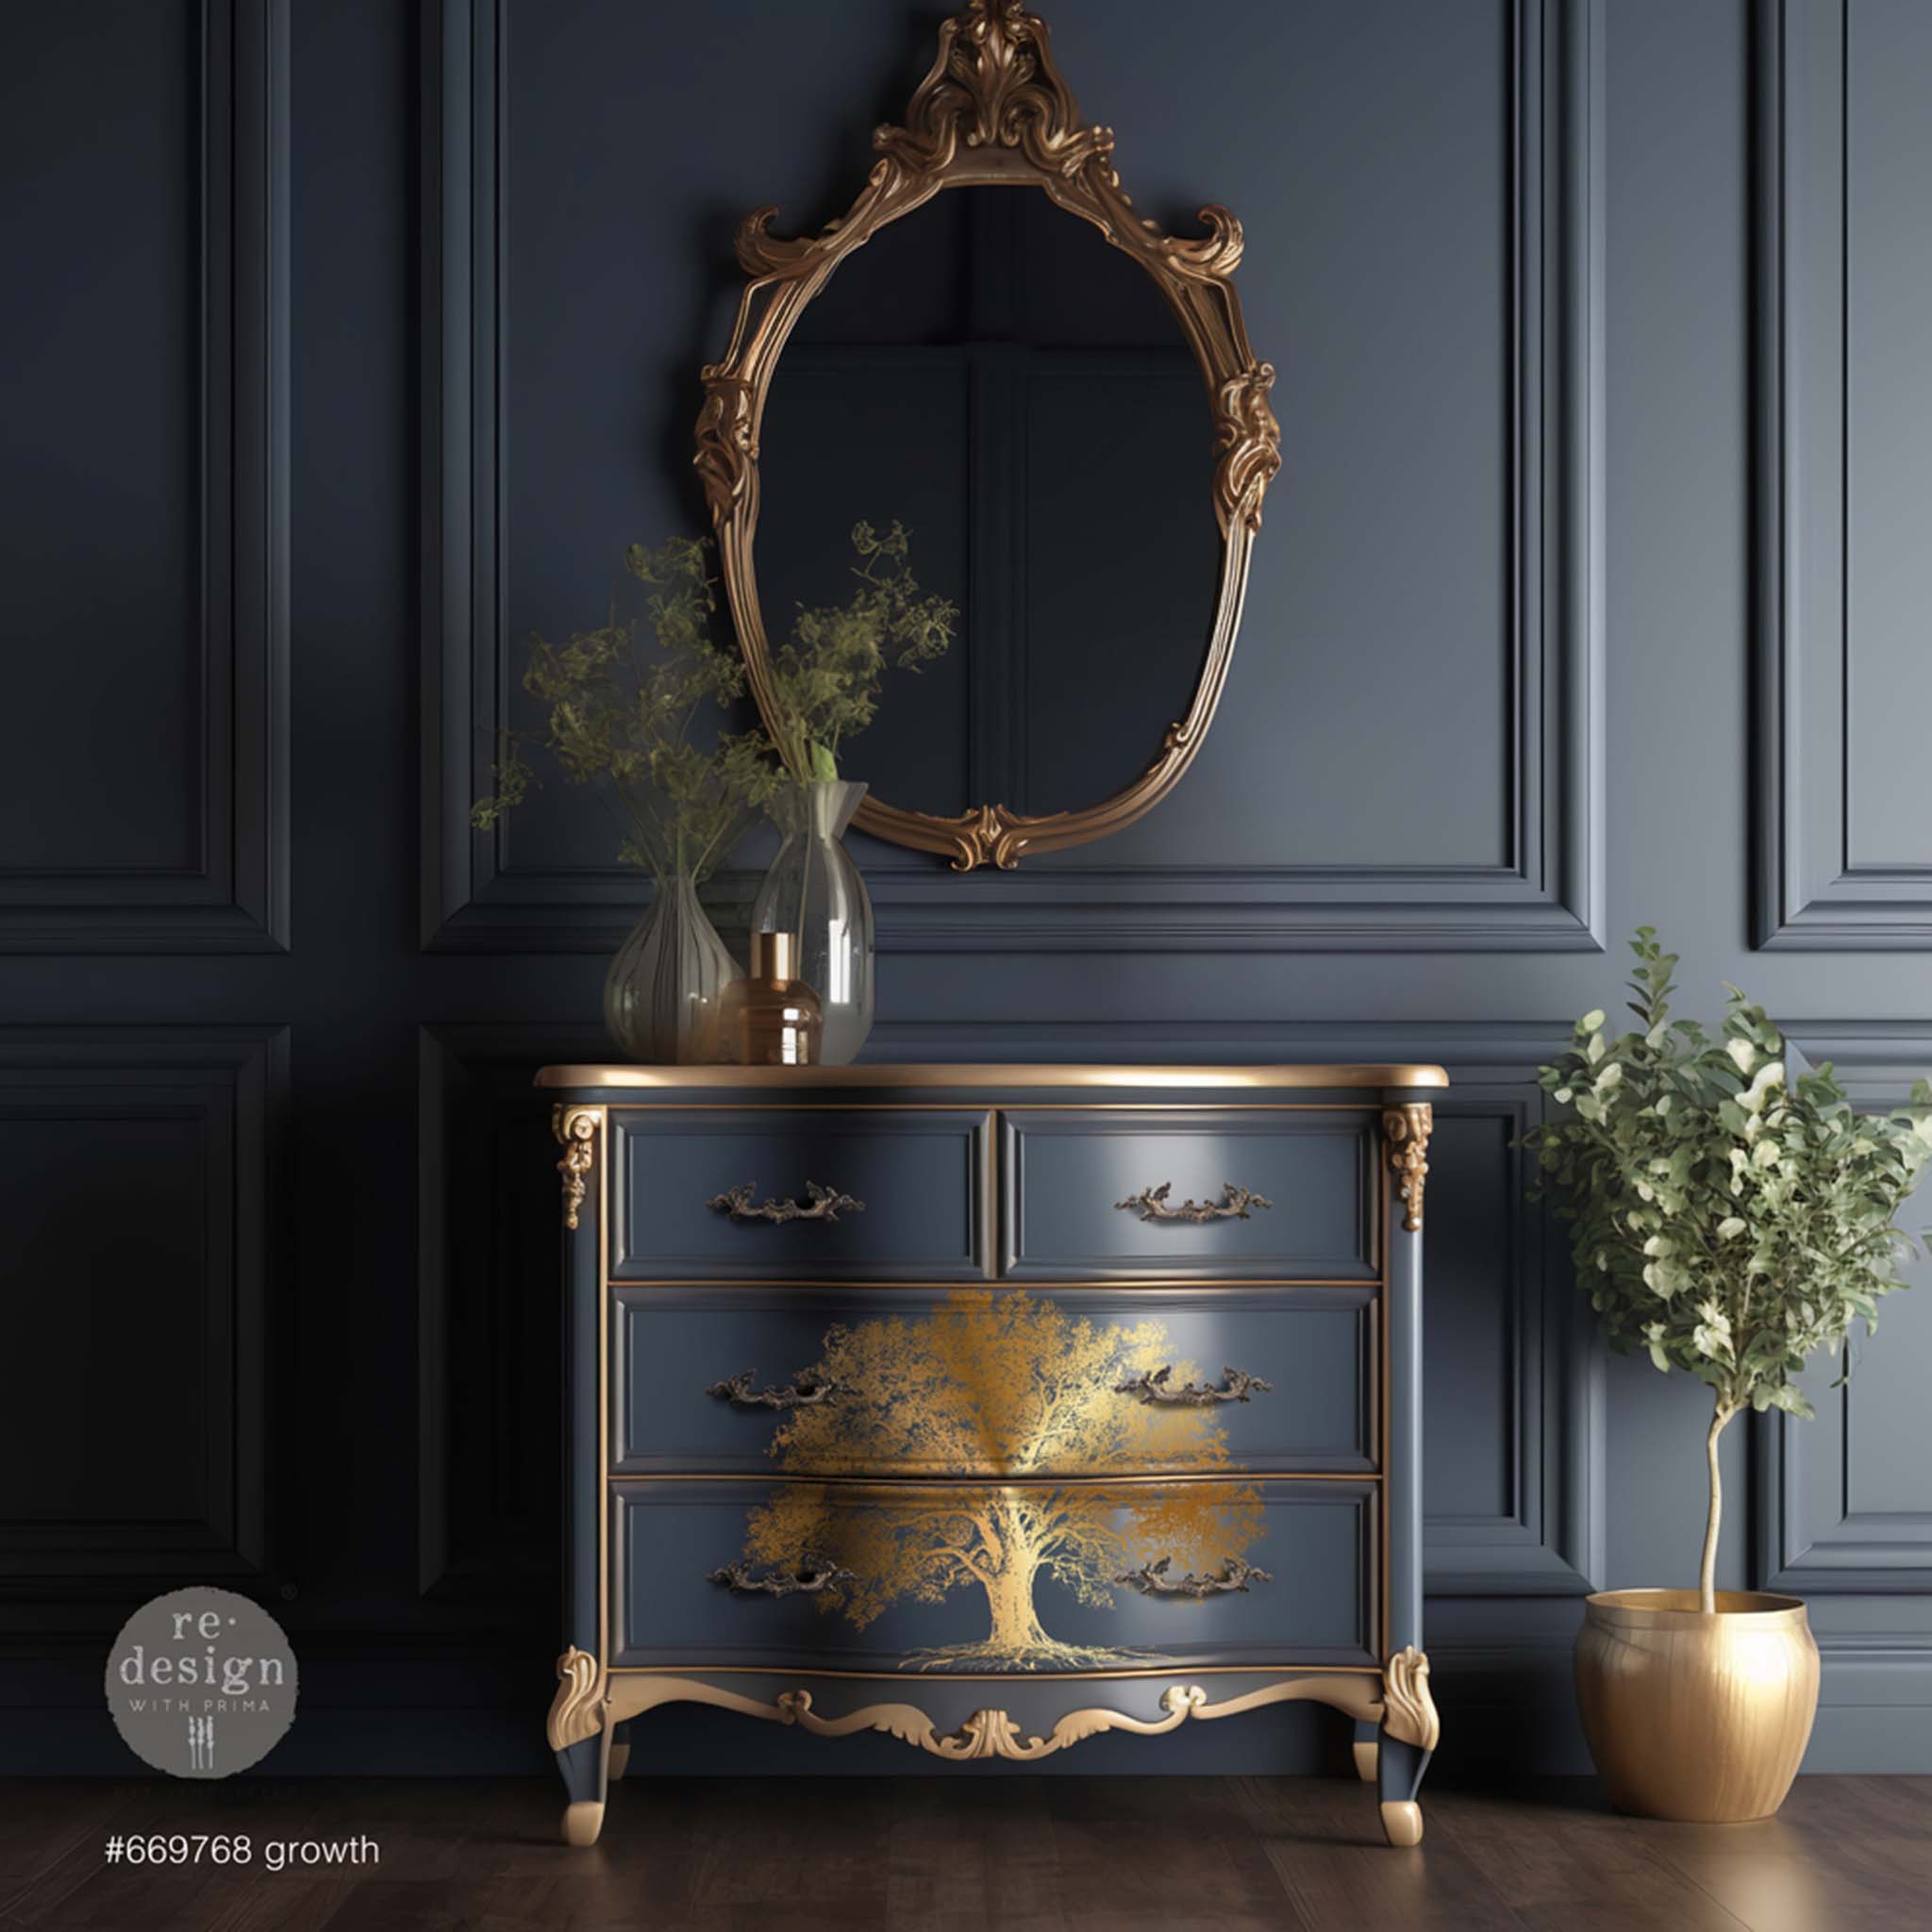 A vintage 4-drawer dresser is painted blue with gold accents and trim and features ReDesign with Prima's Growth Gold Foil transfer by Kacha in the center of the bottom 2 drawers.